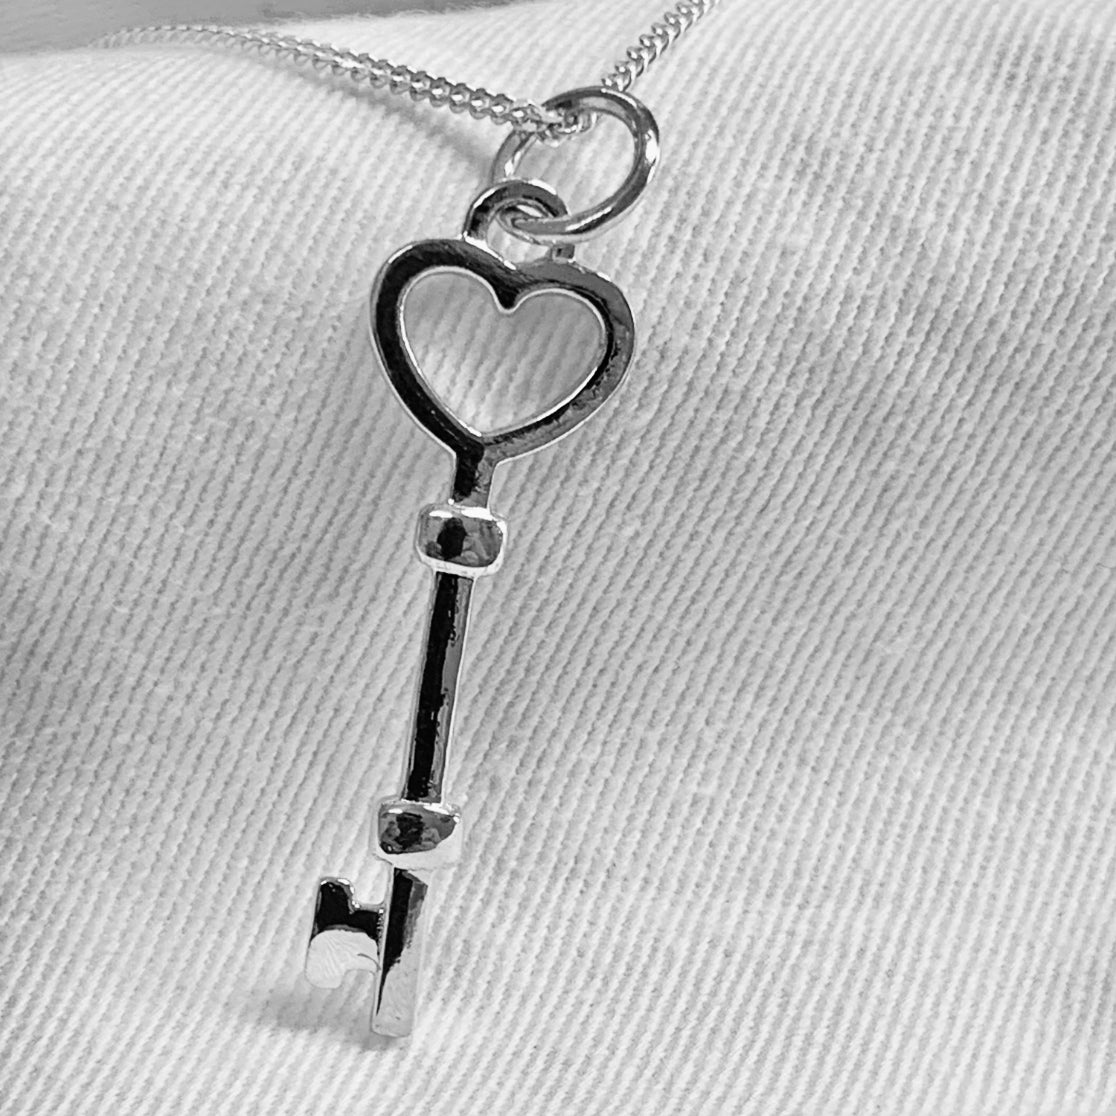 925 Sterling Silver KEY Pendant Chain Necklace A Key For Love Lock